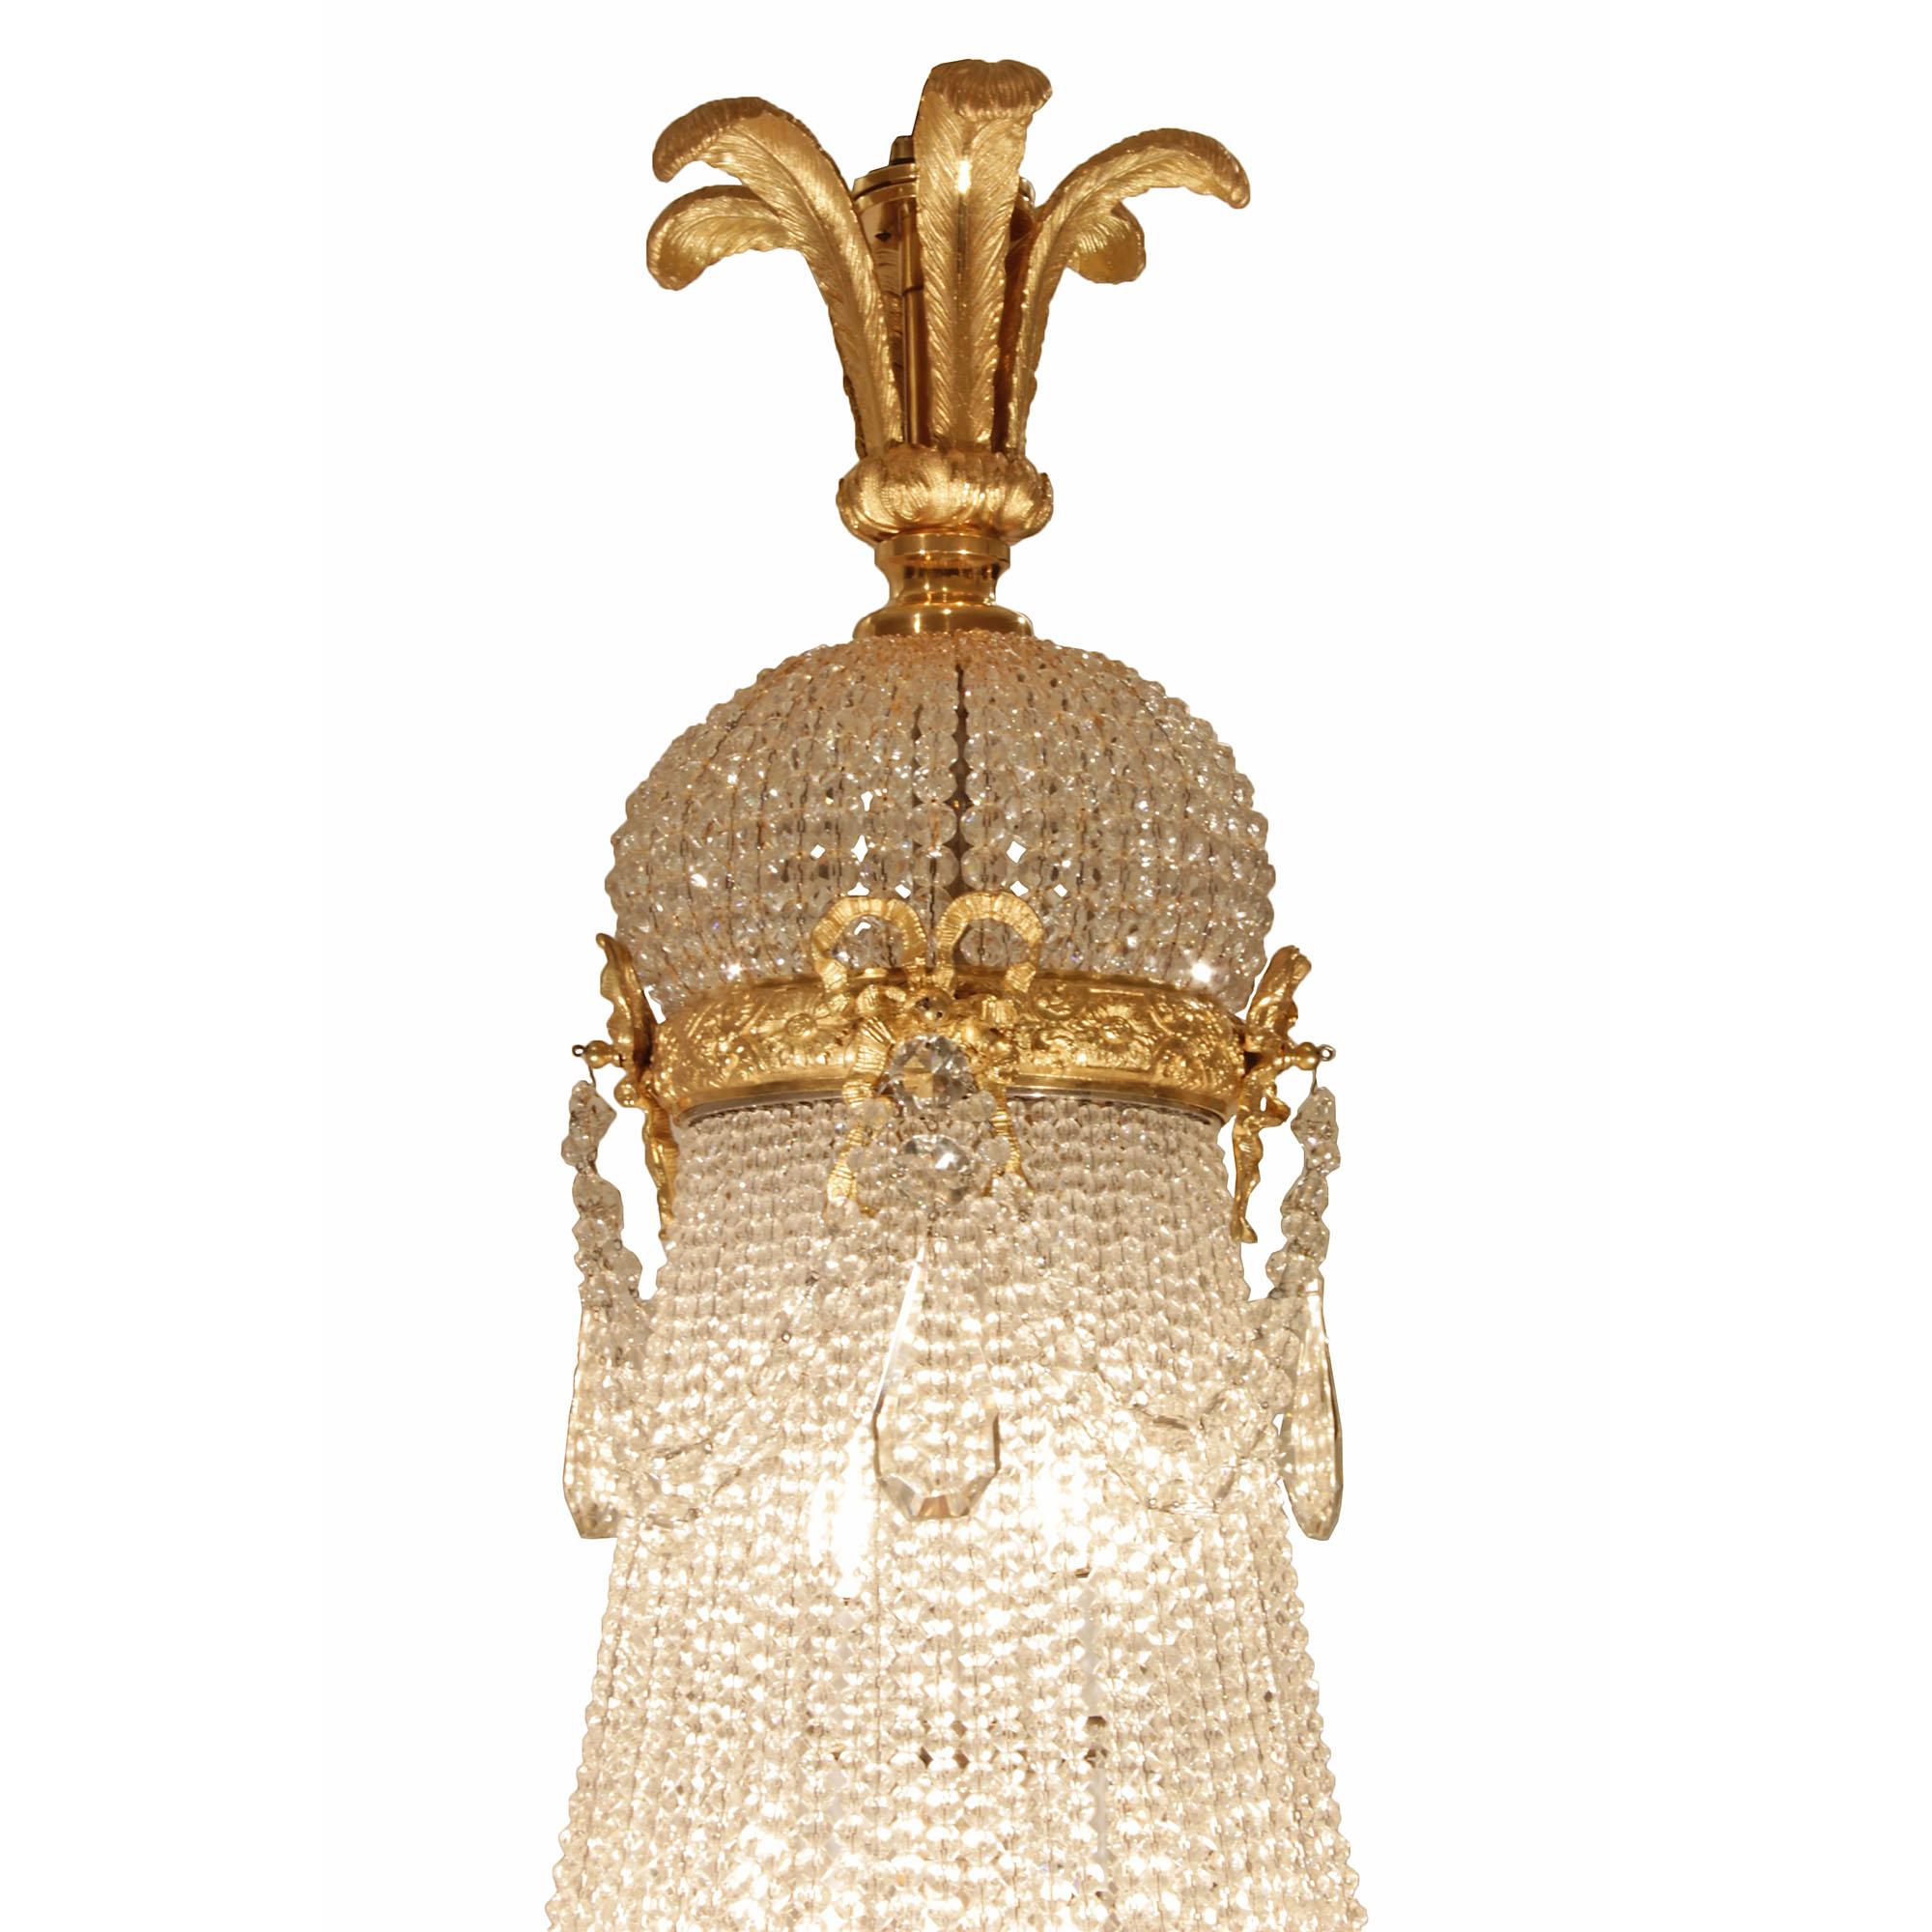 A grand French mid 19th century Louis XVI st. Baccarat crystal and ormolu chandelier. At the bottom is an ormolu acanthus leaf inverted finial with ormolu crown with kite shaped crystal pendants. Above are strands of graduating crystal garlands,